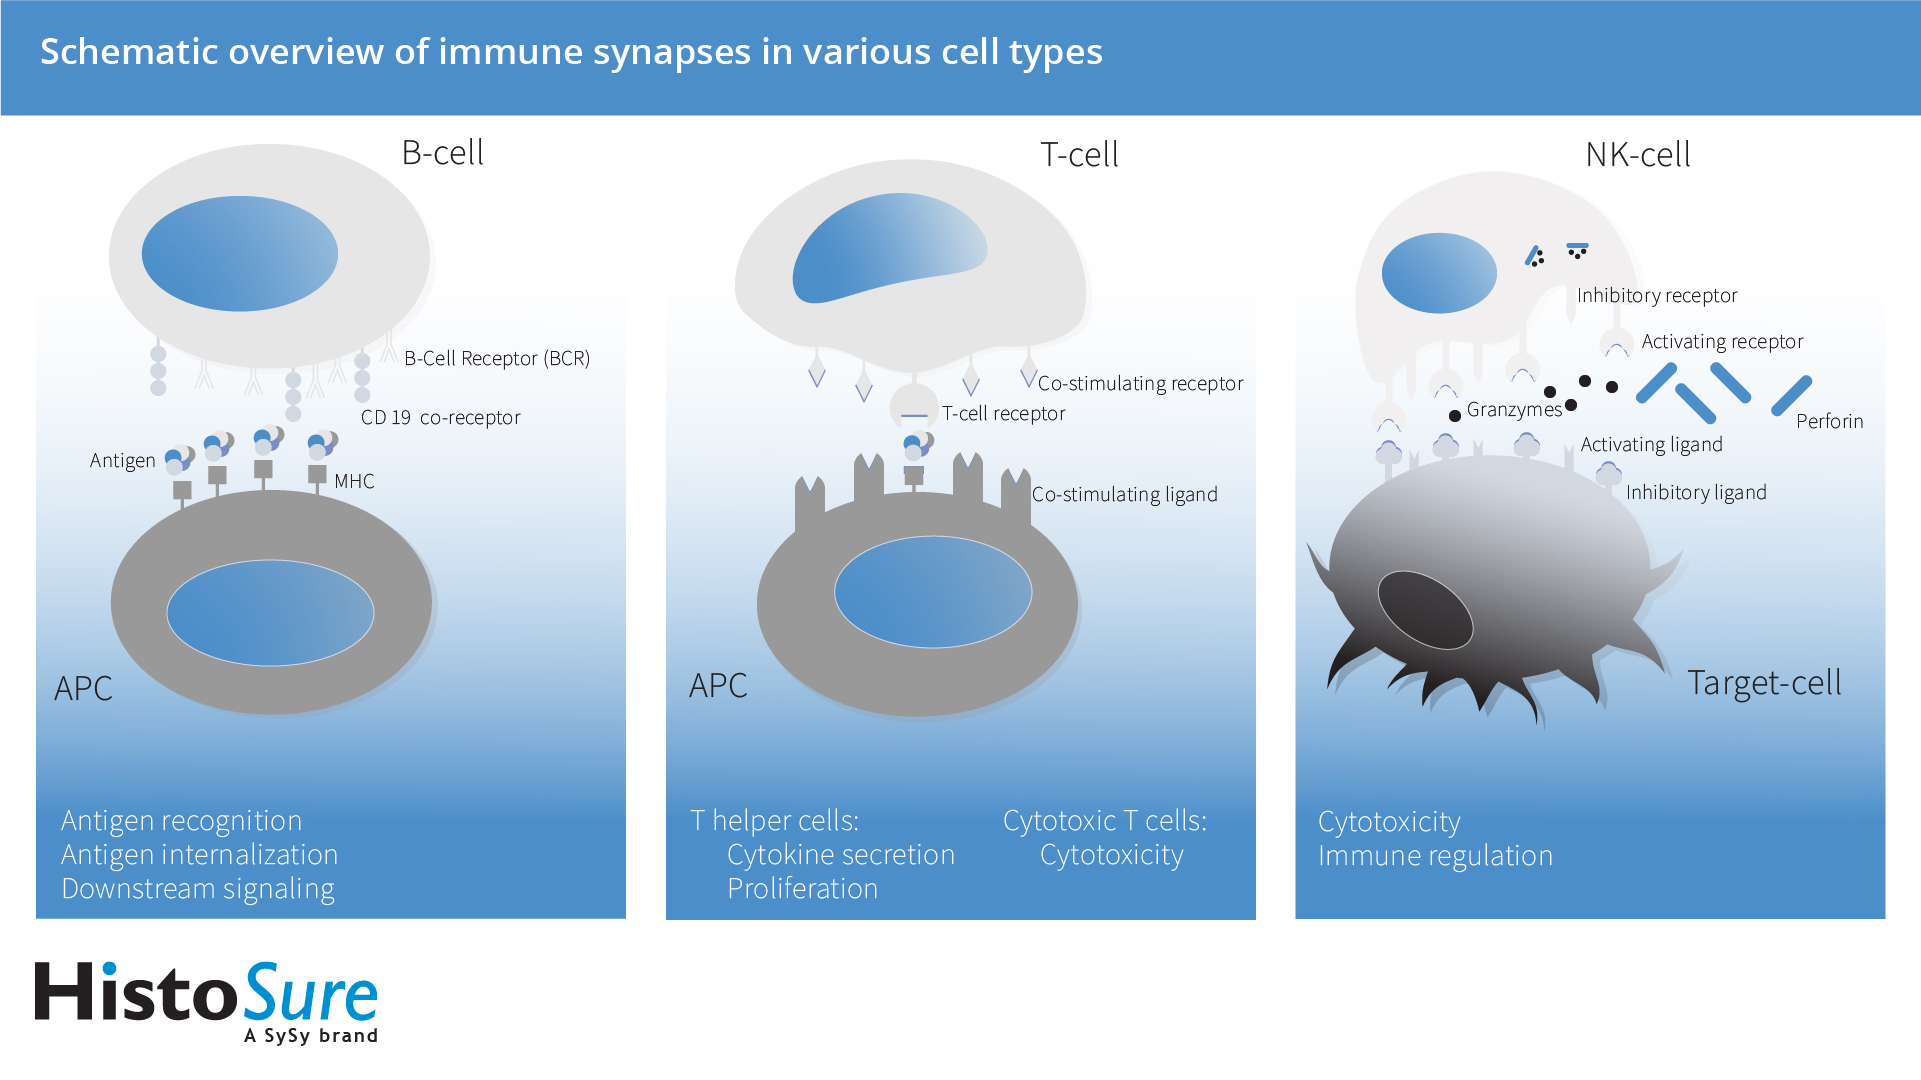 HistoSure Schematic overview of immune synapses in various cell types